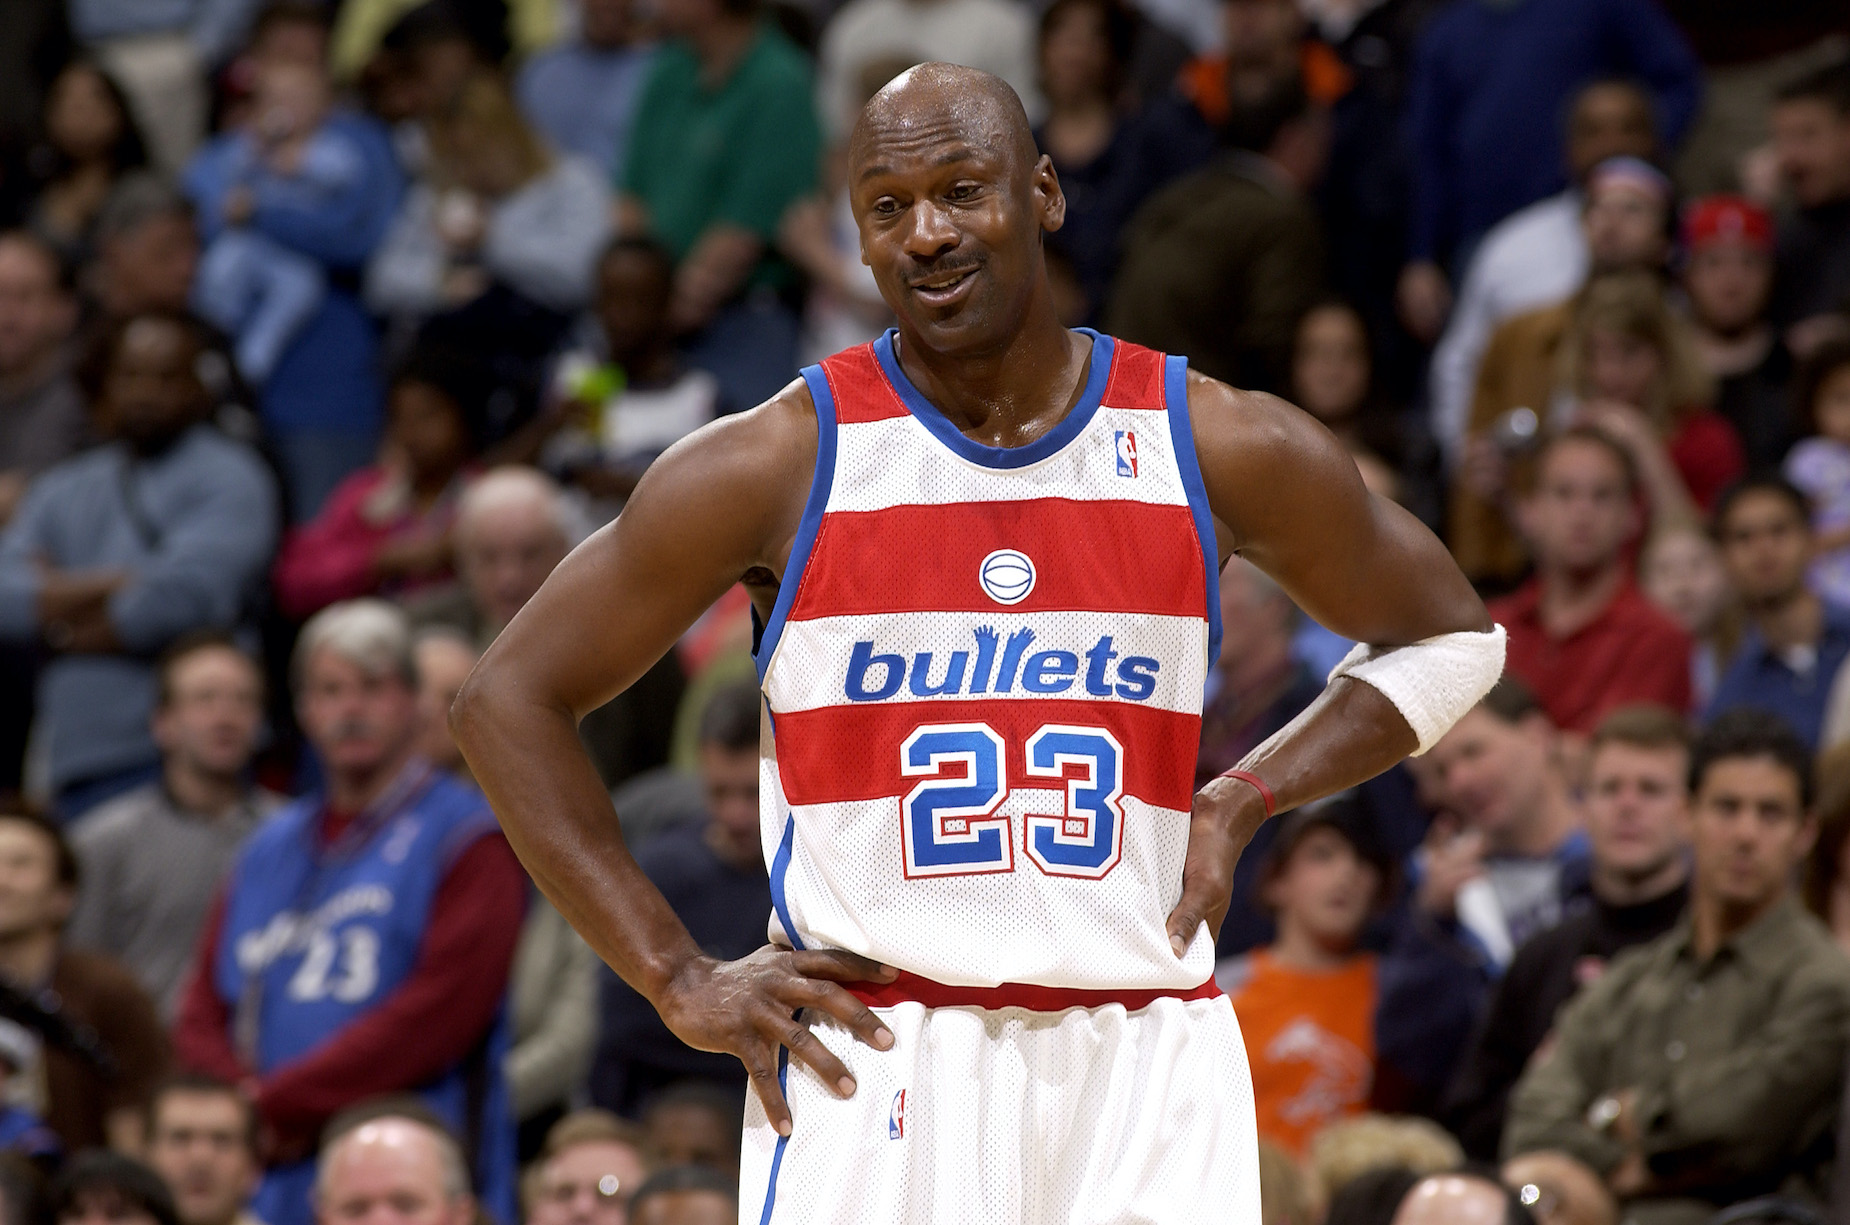 Michael Jordan, who donated all of his 2001-02 salary, in action for the Washington Wizards